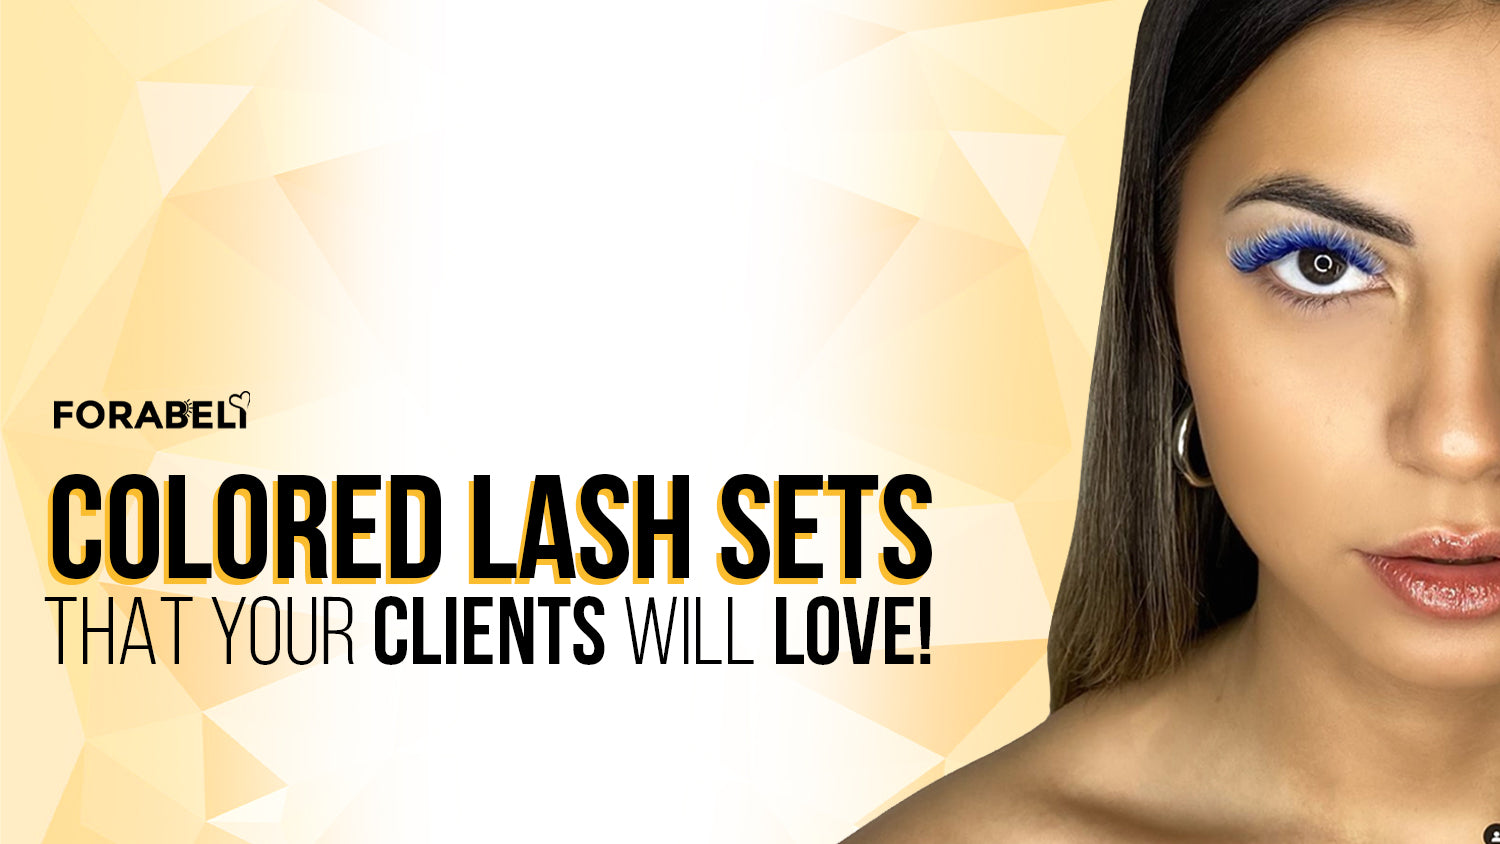 COLORED LASH SETS THAT YOUR CLIENTS WILL LOVE! – Forabeli